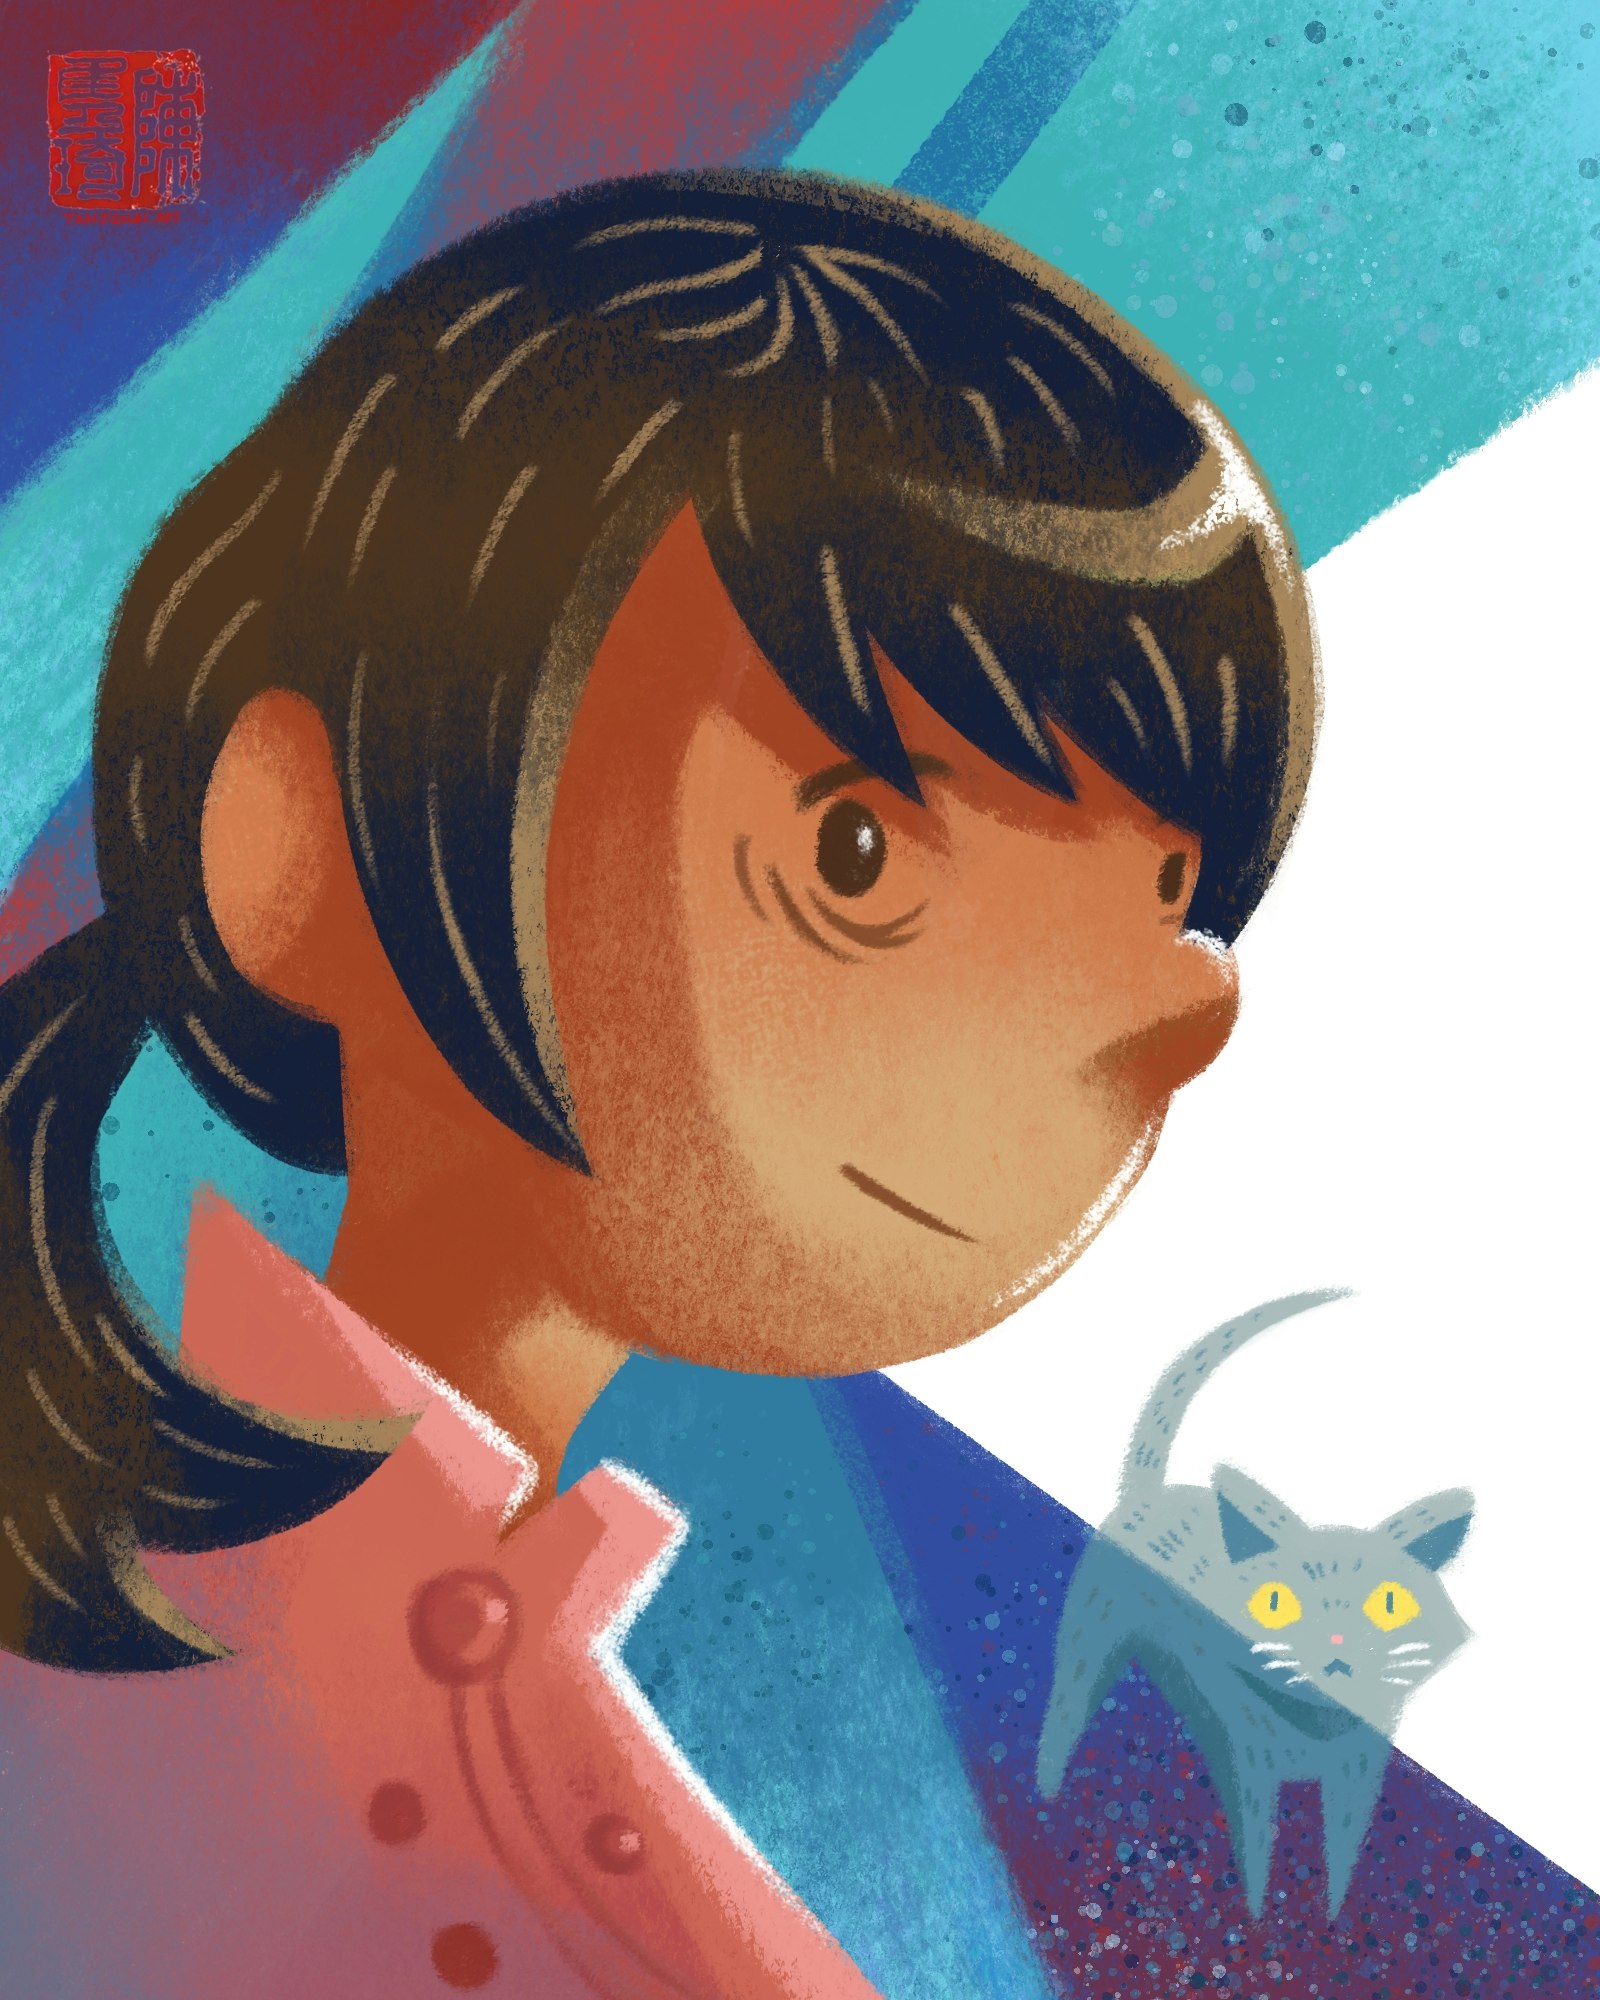 Digital painting of a bust-view of a woman with brown hair tied into a wayward pony tail looking at the viewer. She is wearing a pink mandarin collar blouse. In the background are blue angular shapes and a cat with grey fur and yellow eyes on the street.